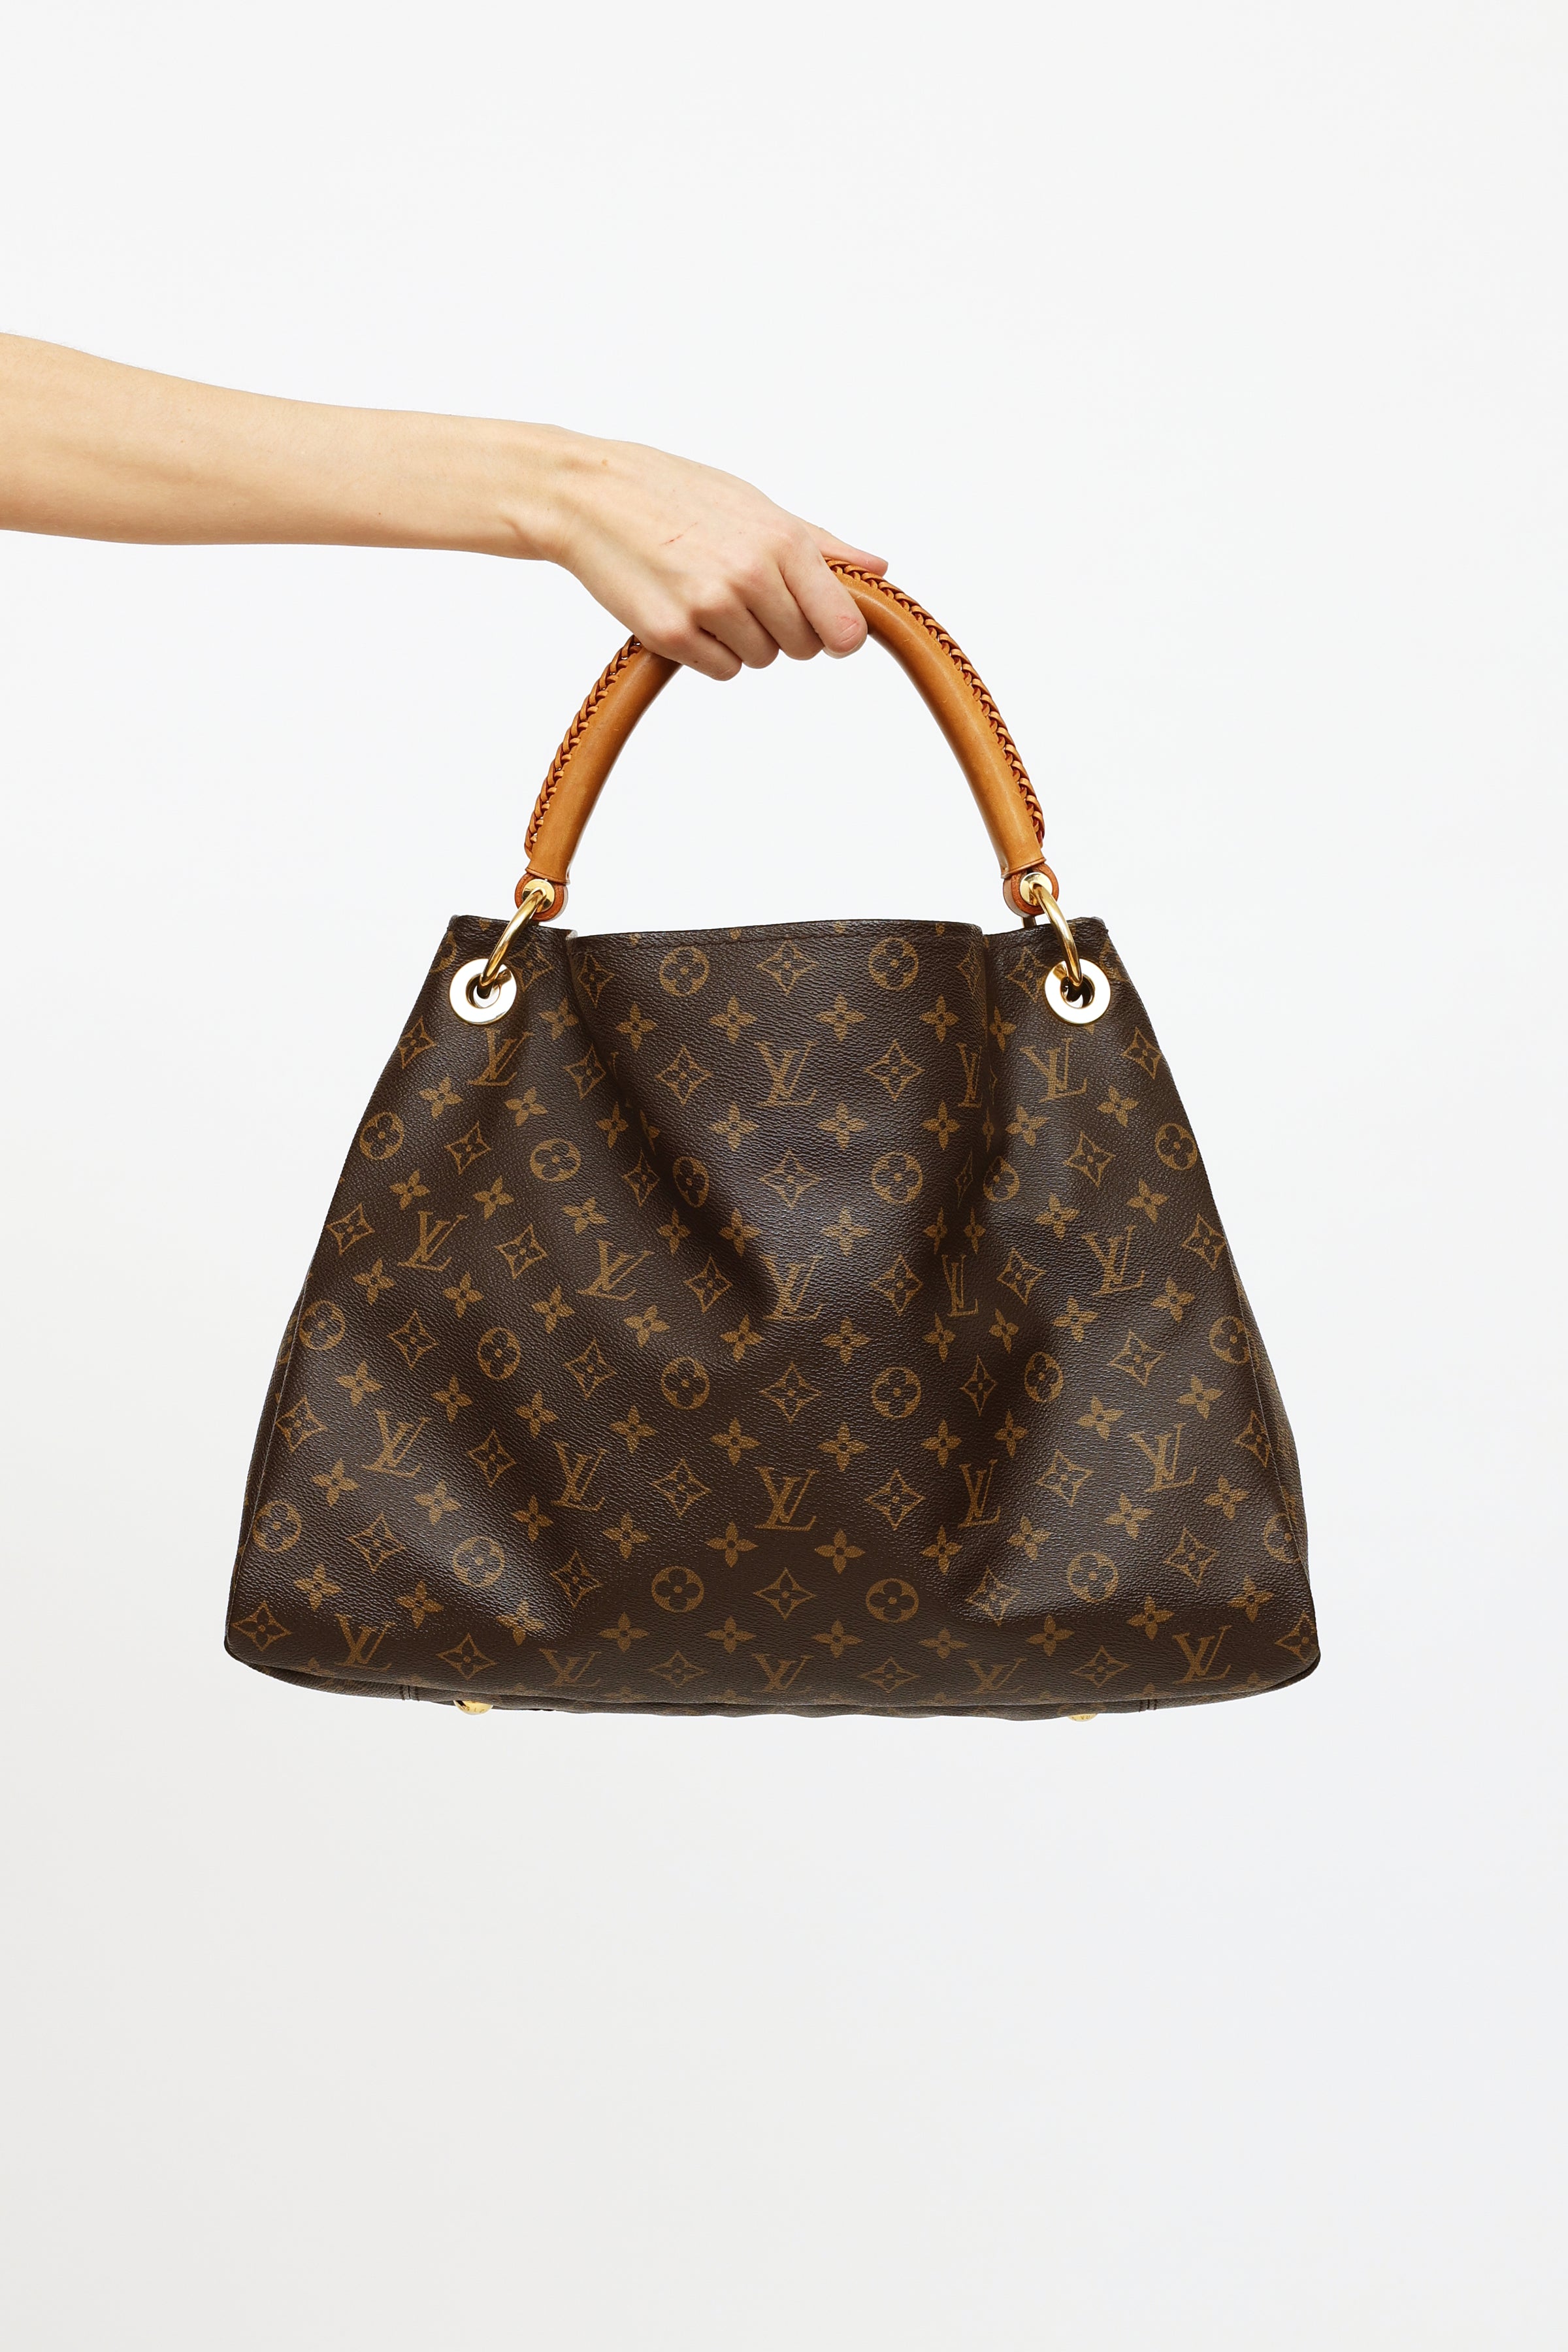 Louis Vuitton 2011 pre-owned Artsy MM tote bag - ShopStyle